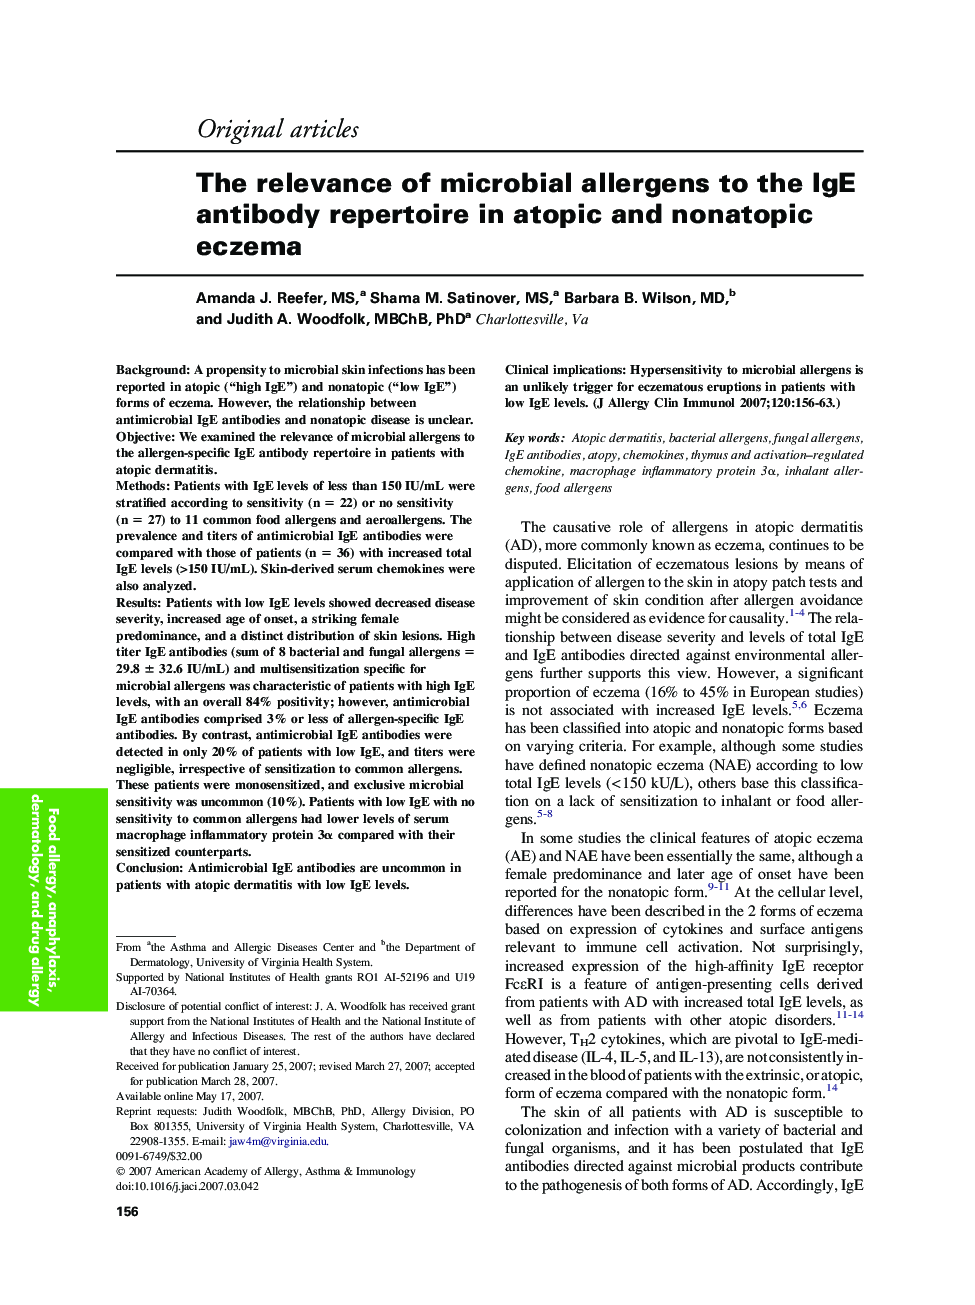 The relevance of microbial allergens to the IgE antibody repertoire in atopic and nonatopic eczema 